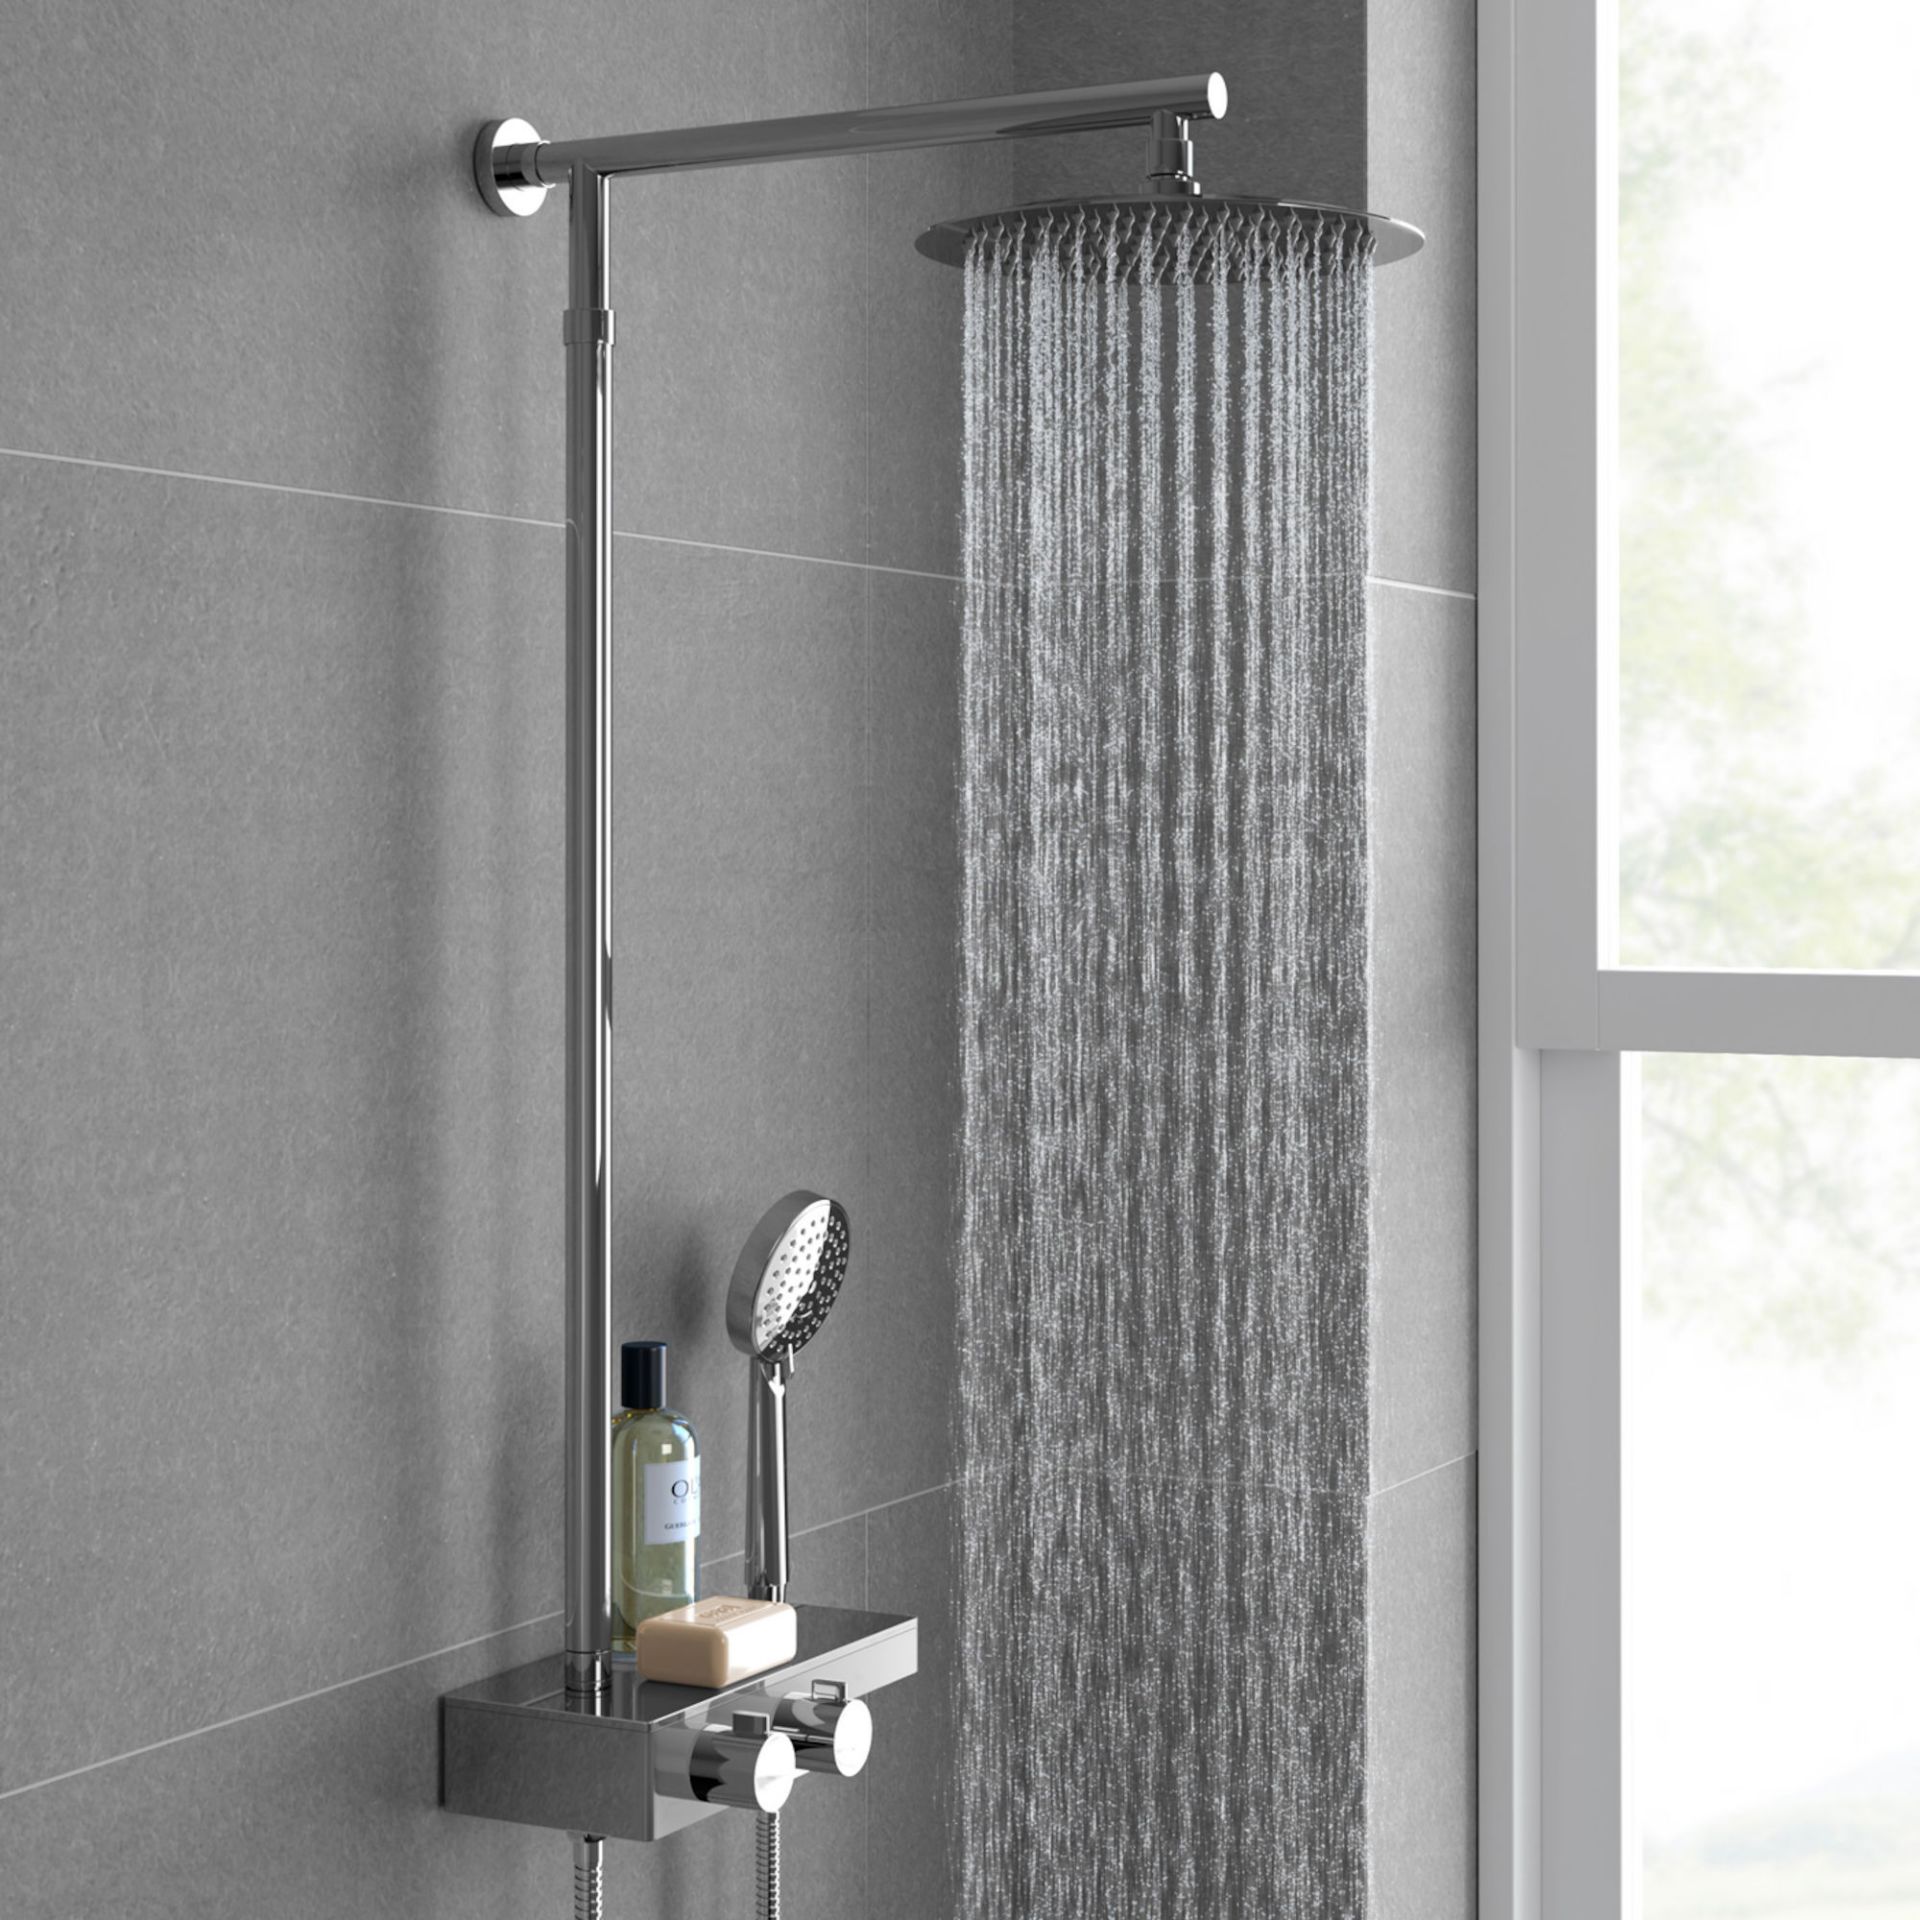 (KL36) Round Exposed Thermostatic Mixer Shower Kit & Large Head. Cool to touch shower for additional